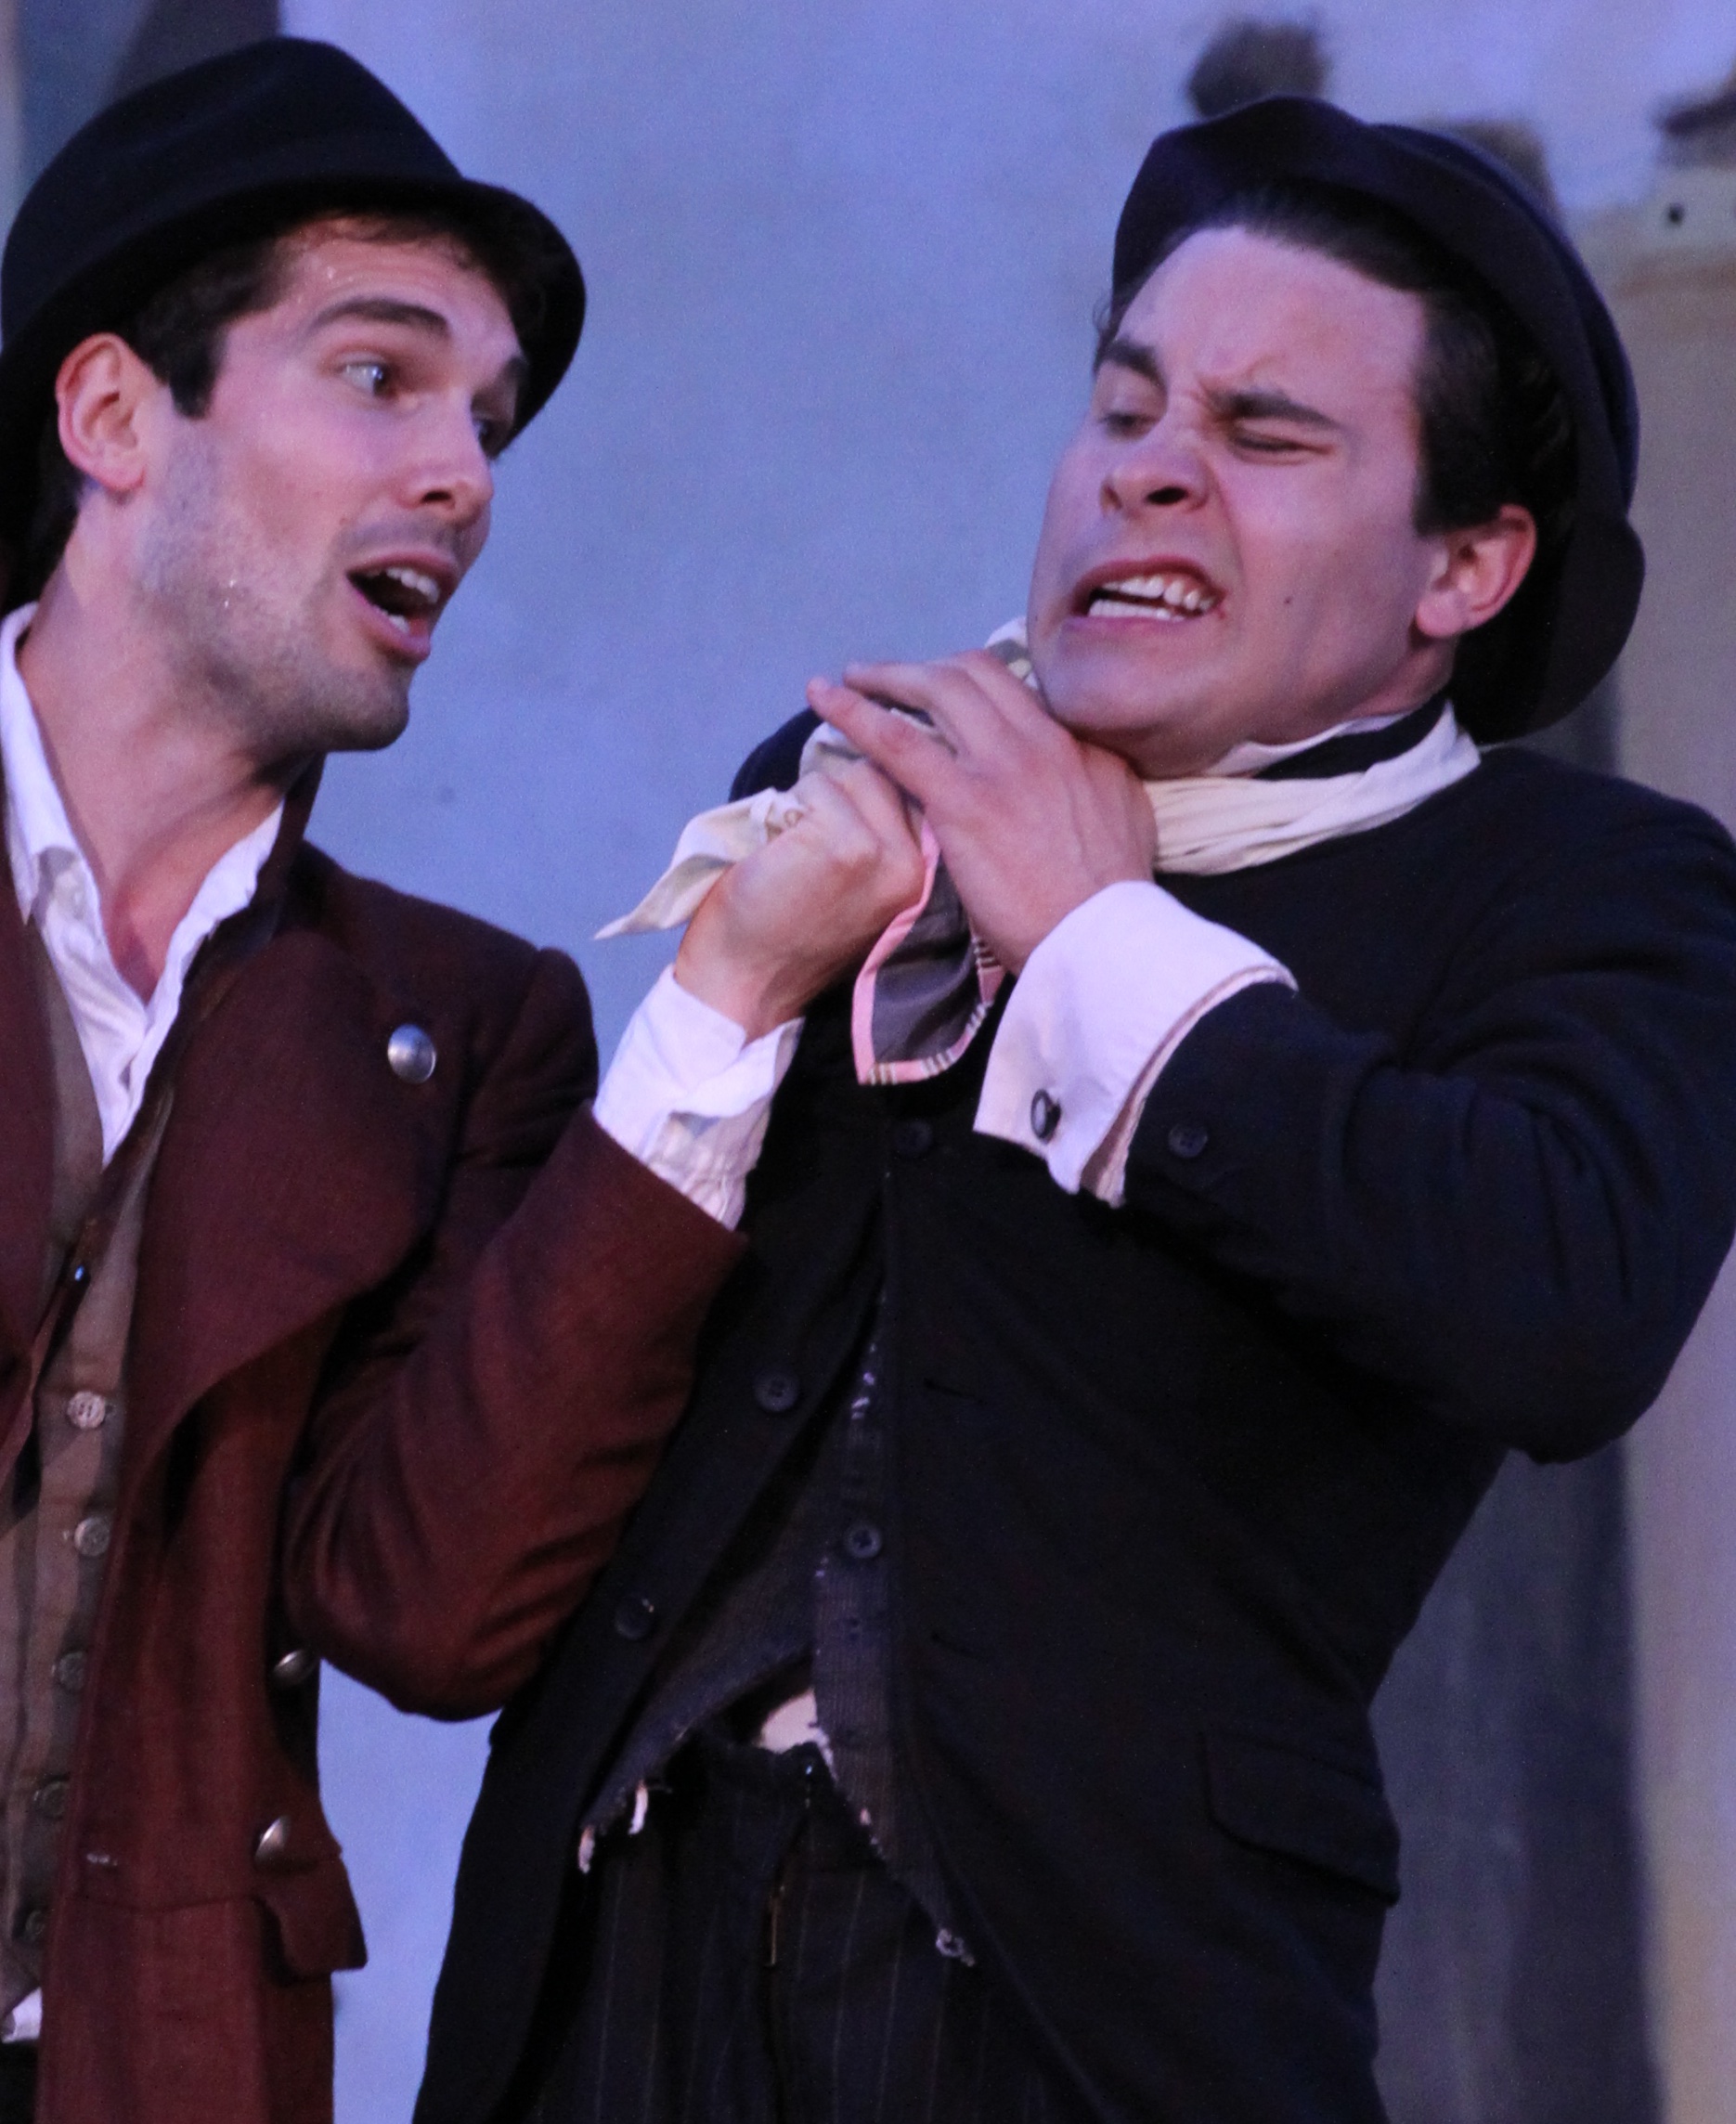 Matthew Simpson and Sean Hudock in 'The Comedy of Errors' at The Shakespeare Theatre of New Jersey (2012)